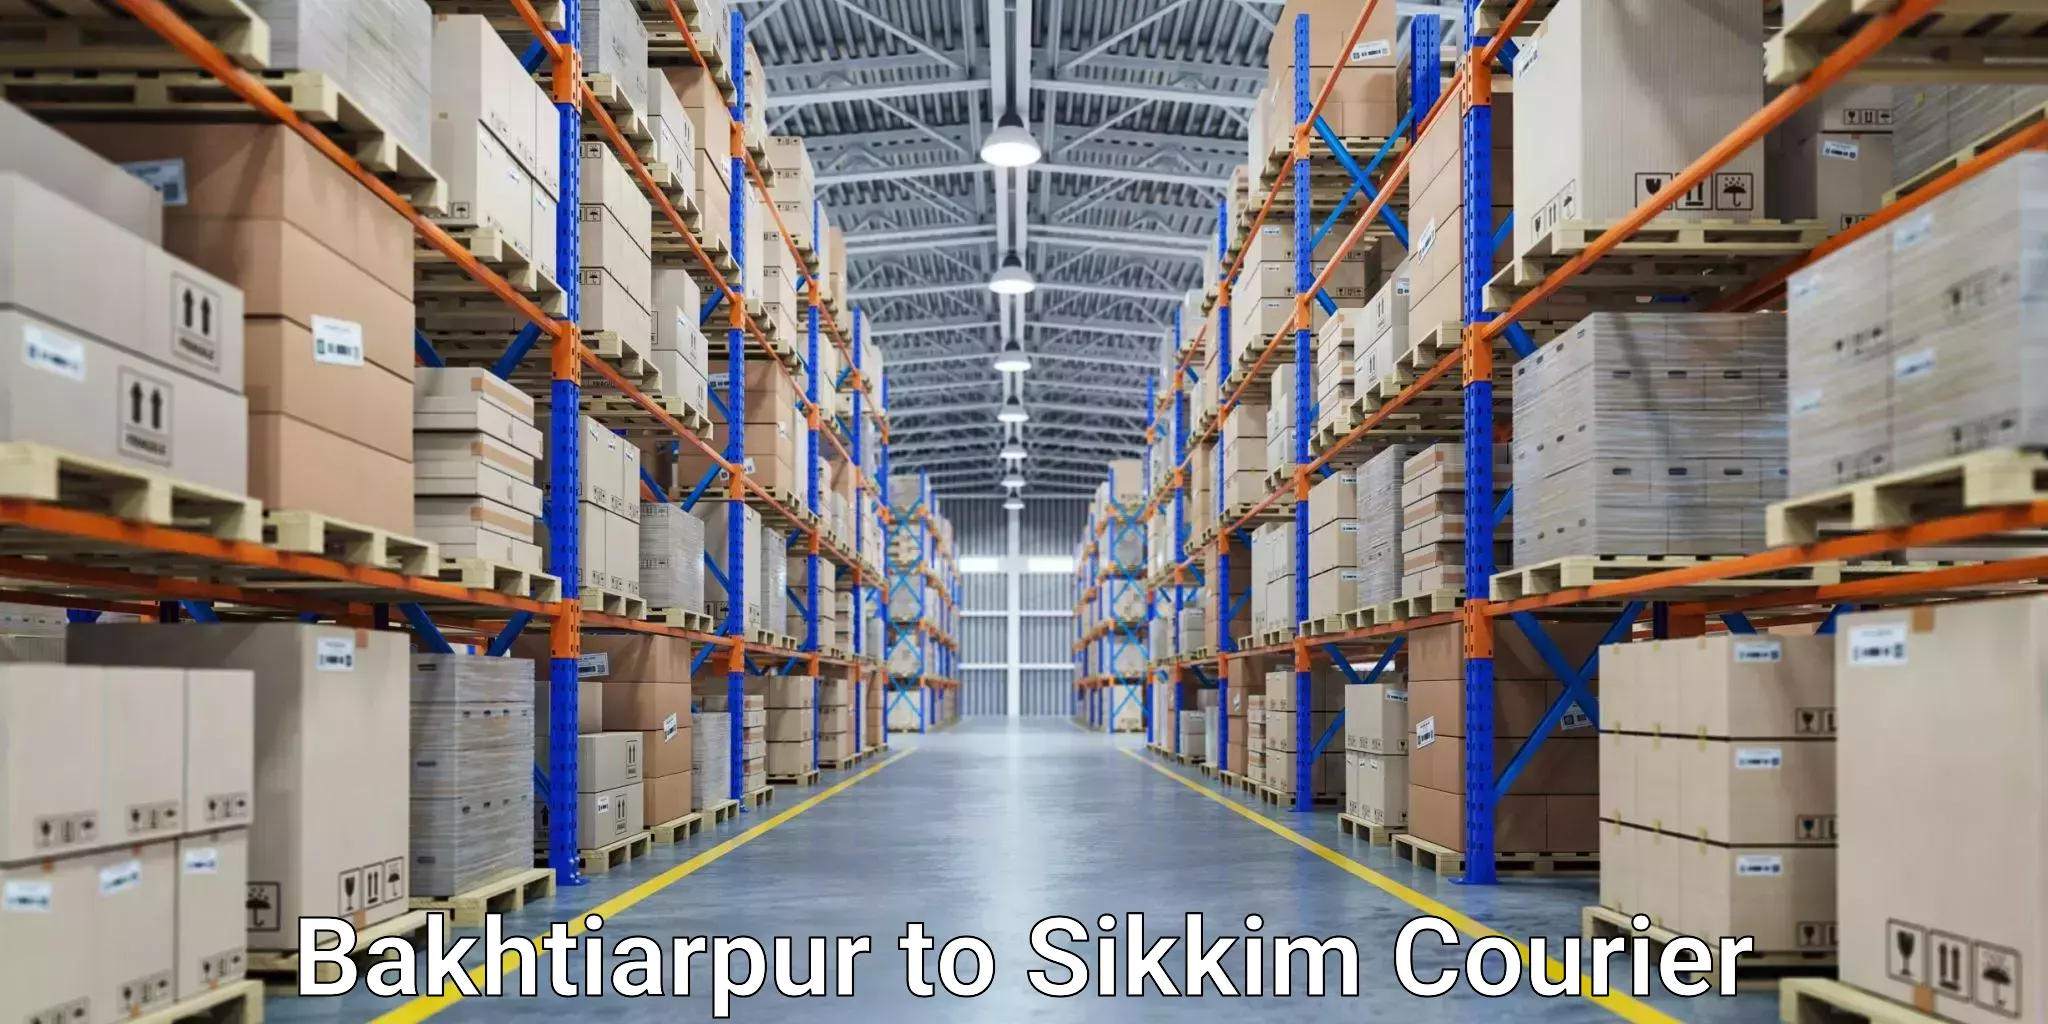 Flexible delivery scheduling Bakhtiarpur to North Sikkim